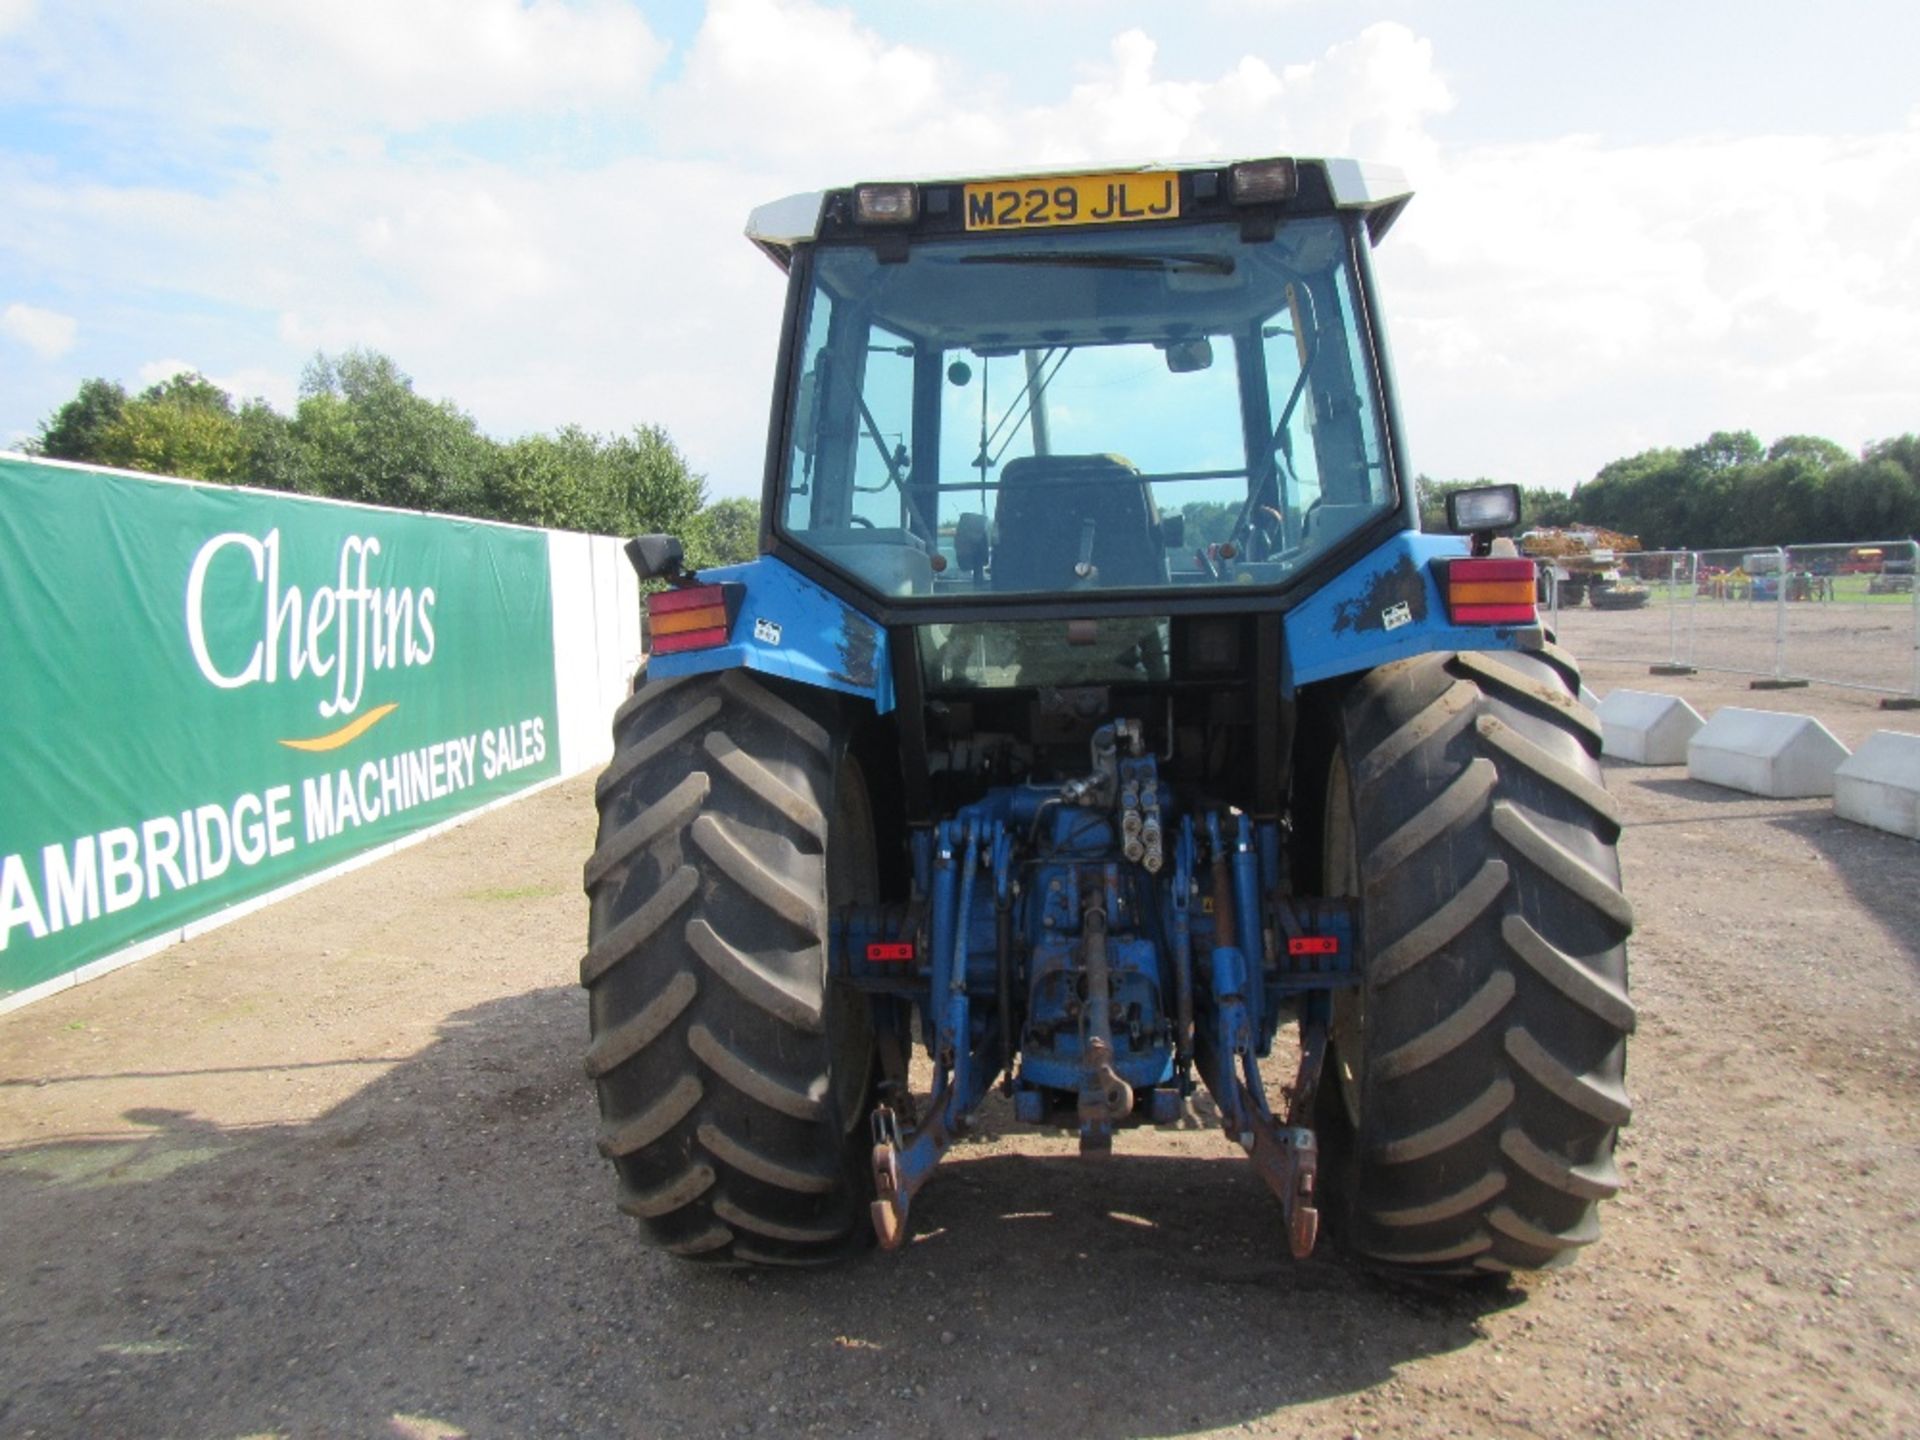 Ford New Holland 8340 SLE 40k Tractor with Air Con. Reg. No. M229 JLJ Ser No BD85370 - Image 6 of 17